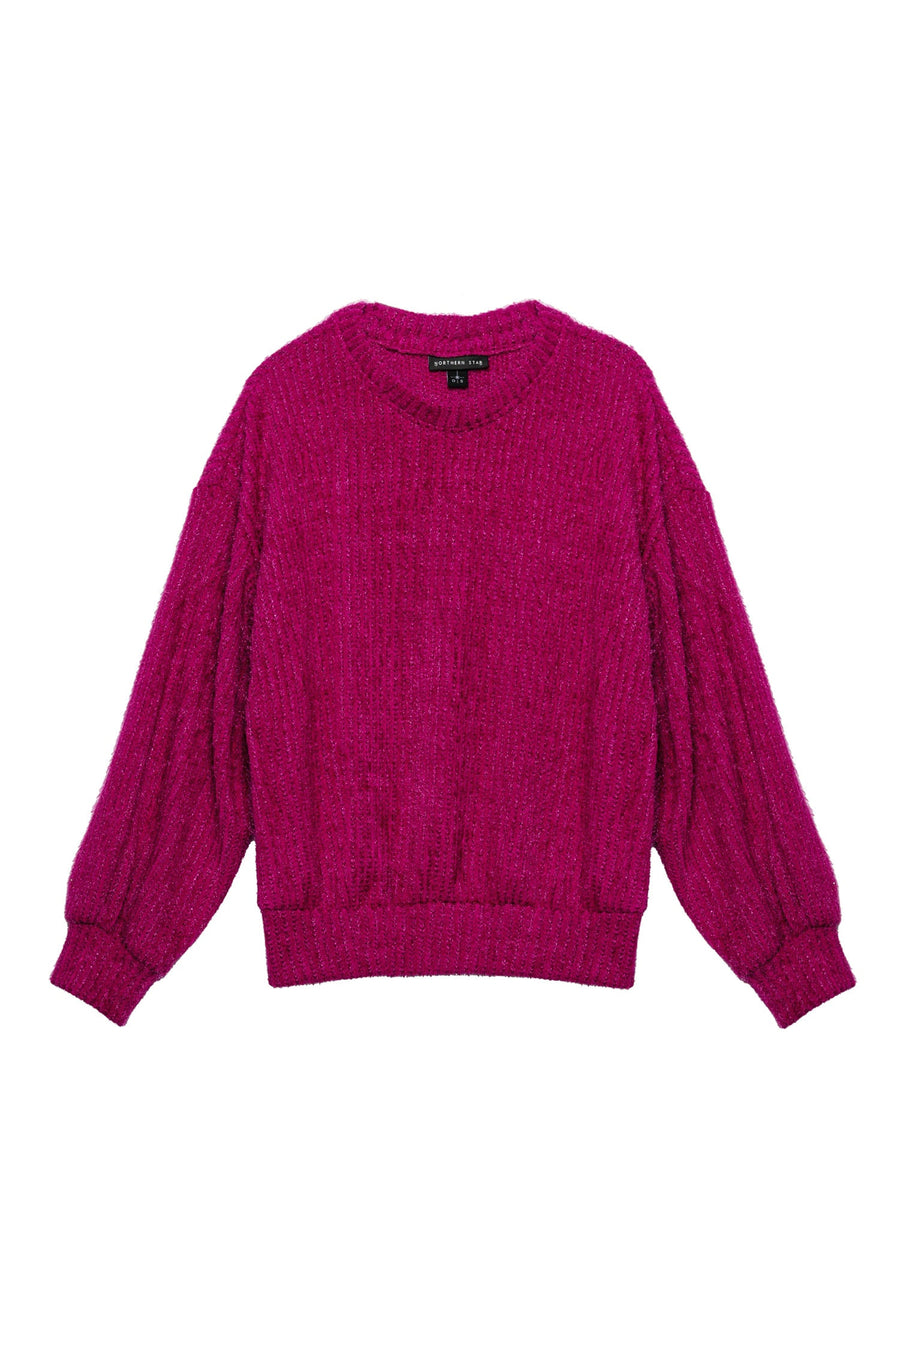 DISTANCE SWEATER PINK